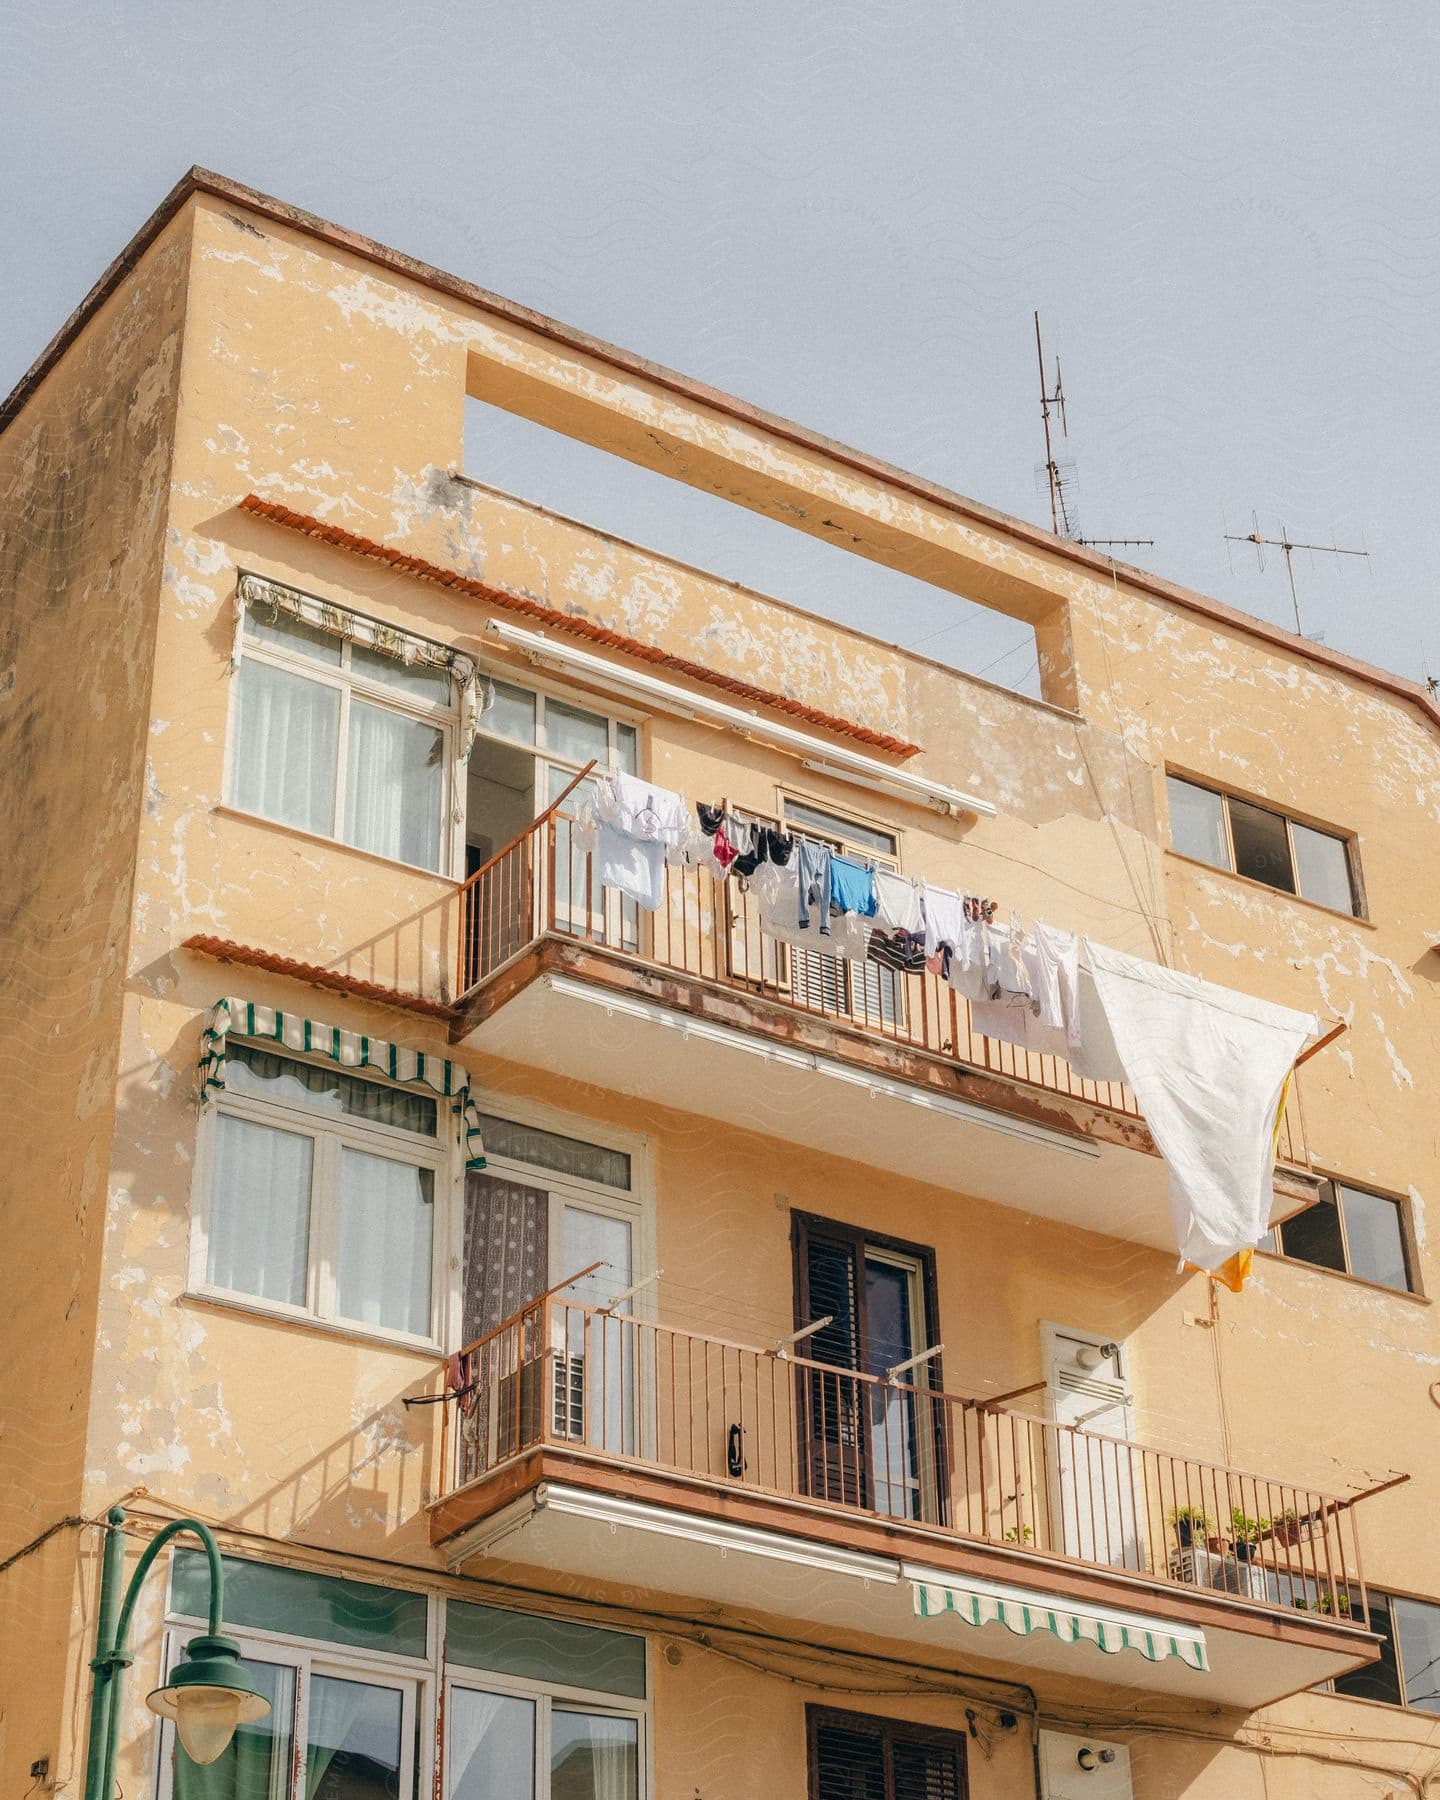 An apartment building with clothes hanging on a balcony